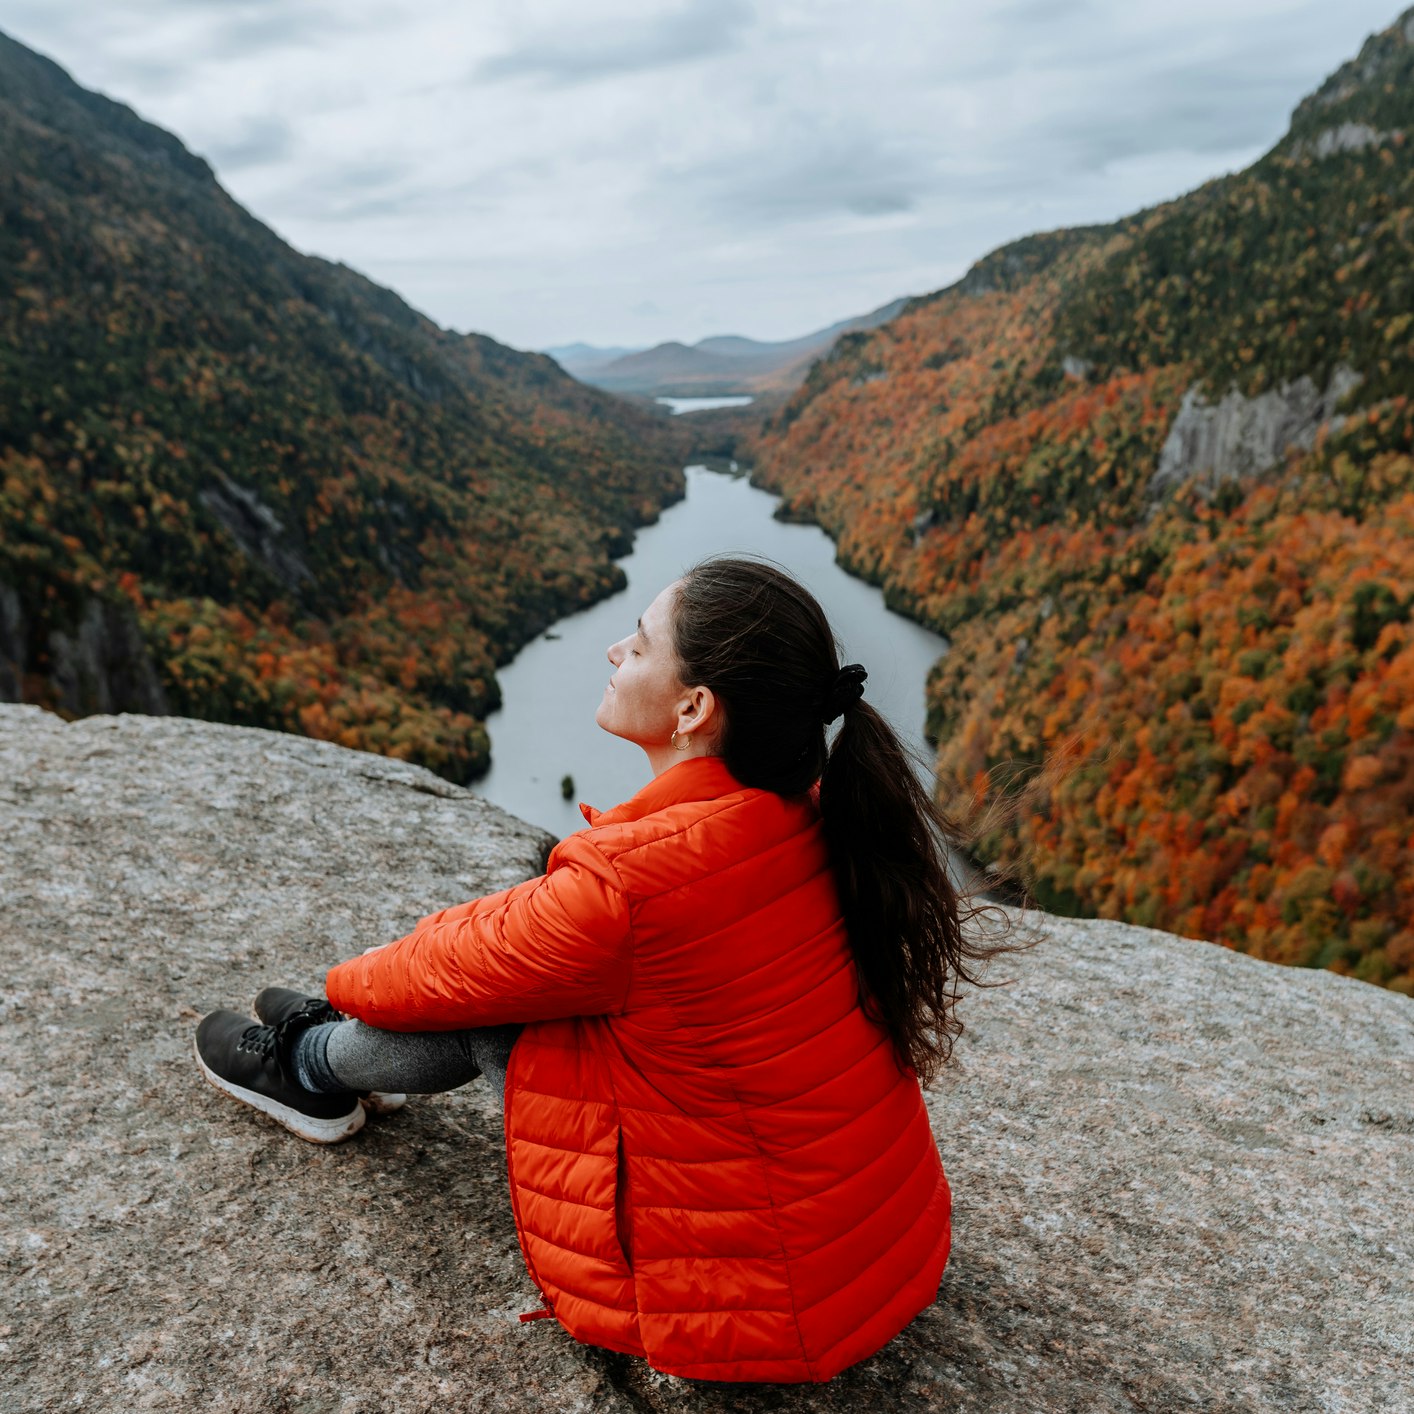 Hiking in the Adirondack Mountain Indian Head Trail in the fall
A woman sits on a rock overlooking a river and the Adirondacks mountains in the fall